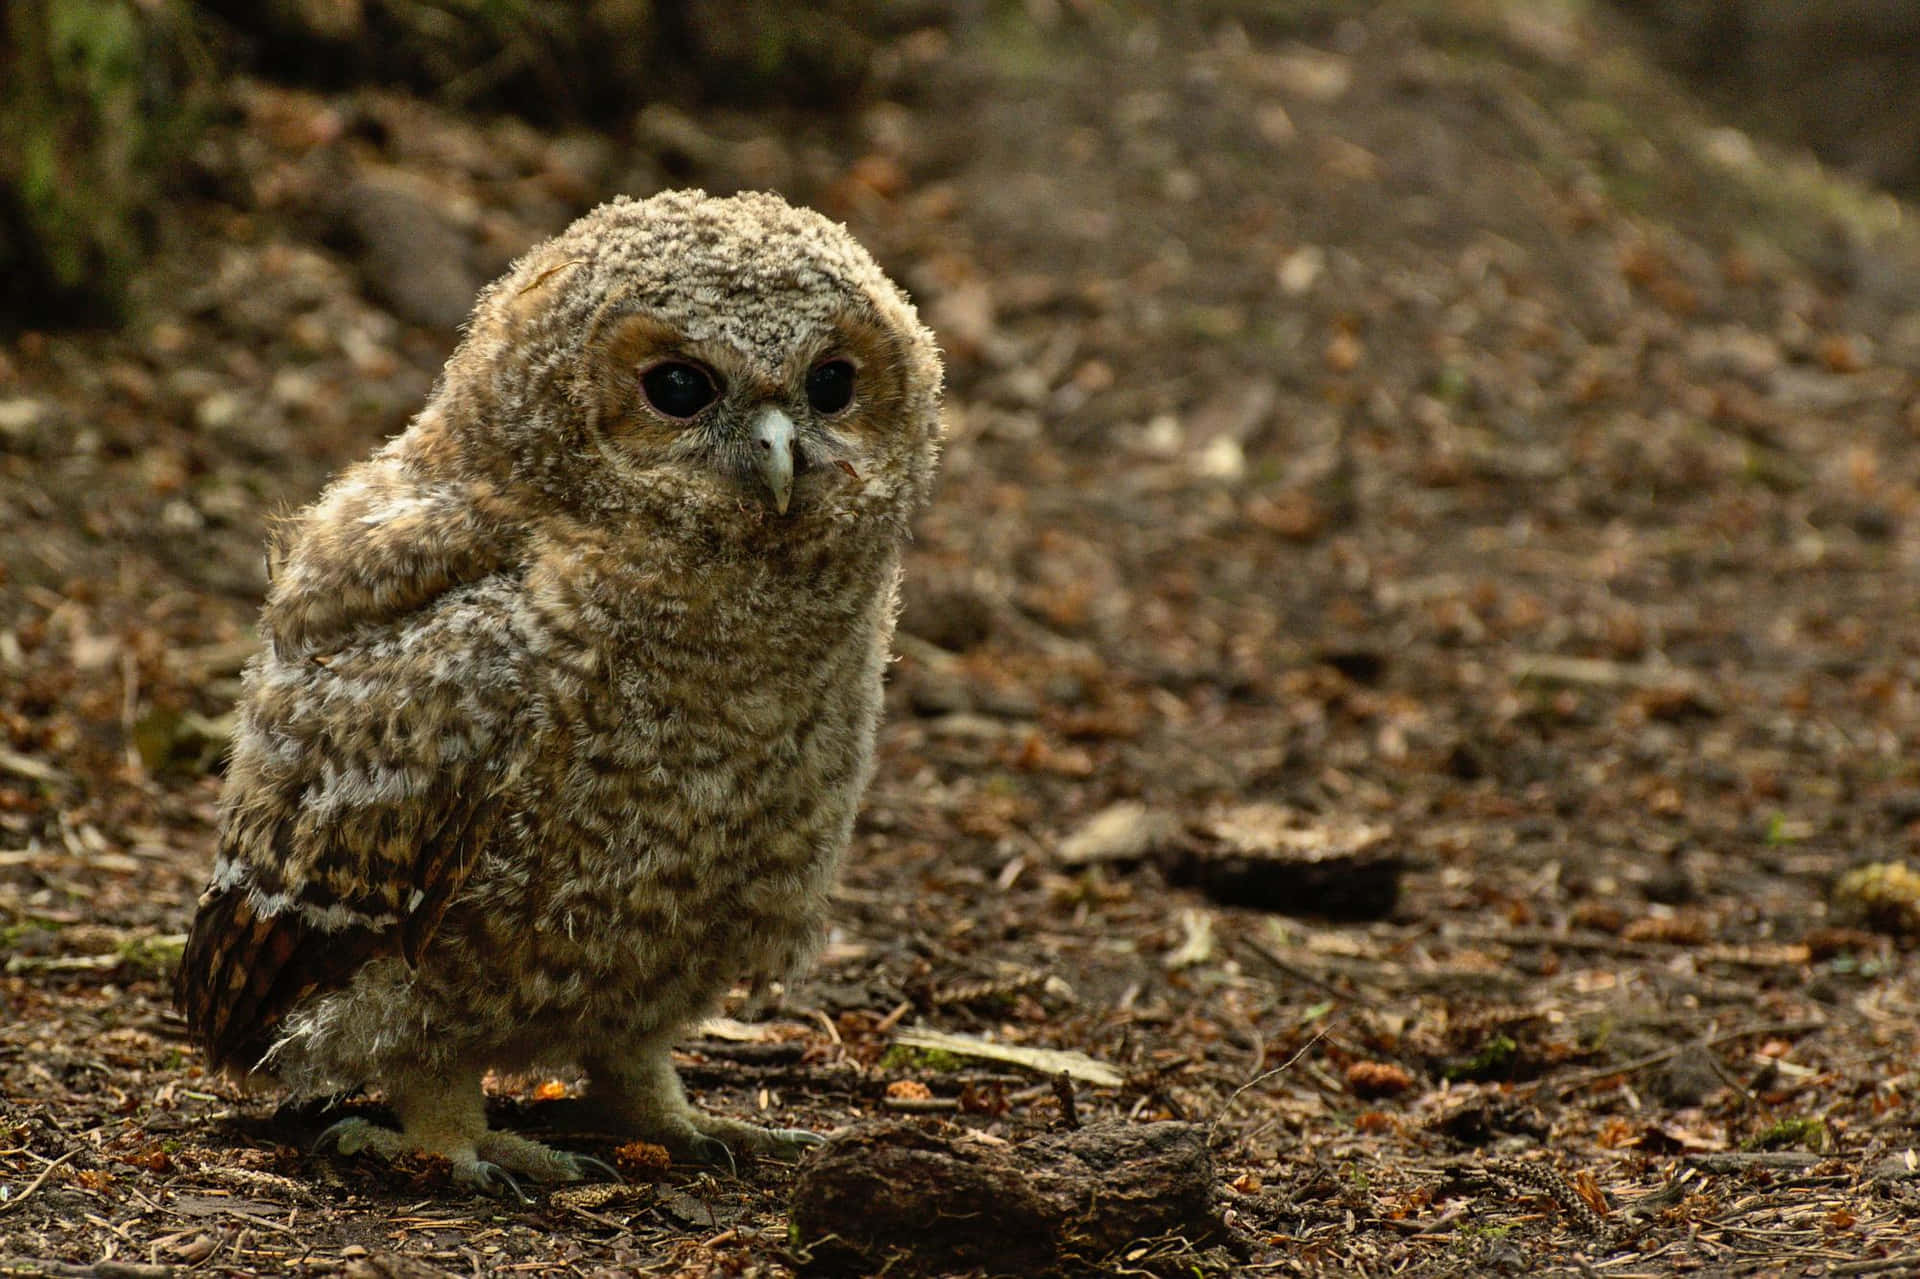 A Small Owl Standing On The Ground